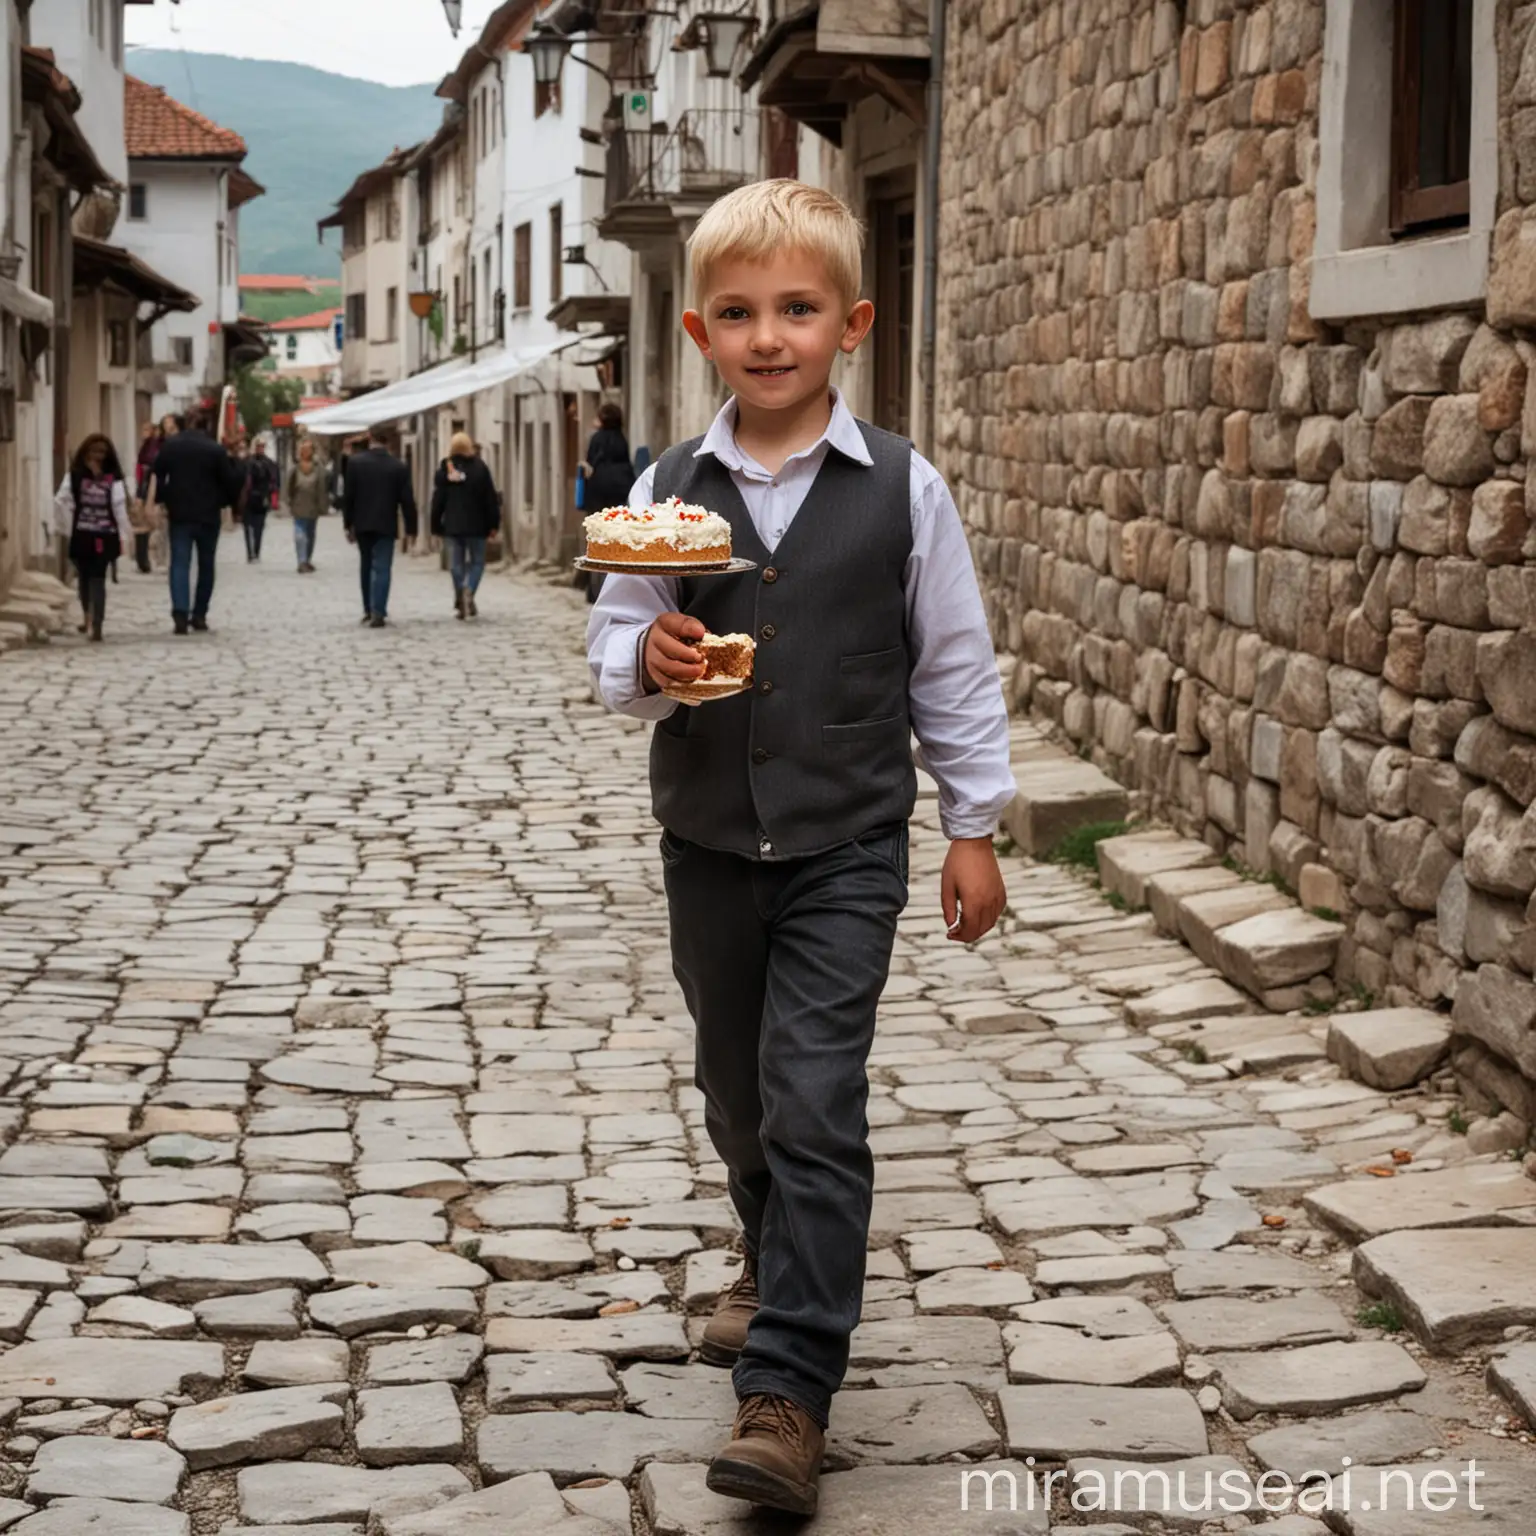 Make a blondes boy a age 9 walking in old Prizren city in hand hold the cake